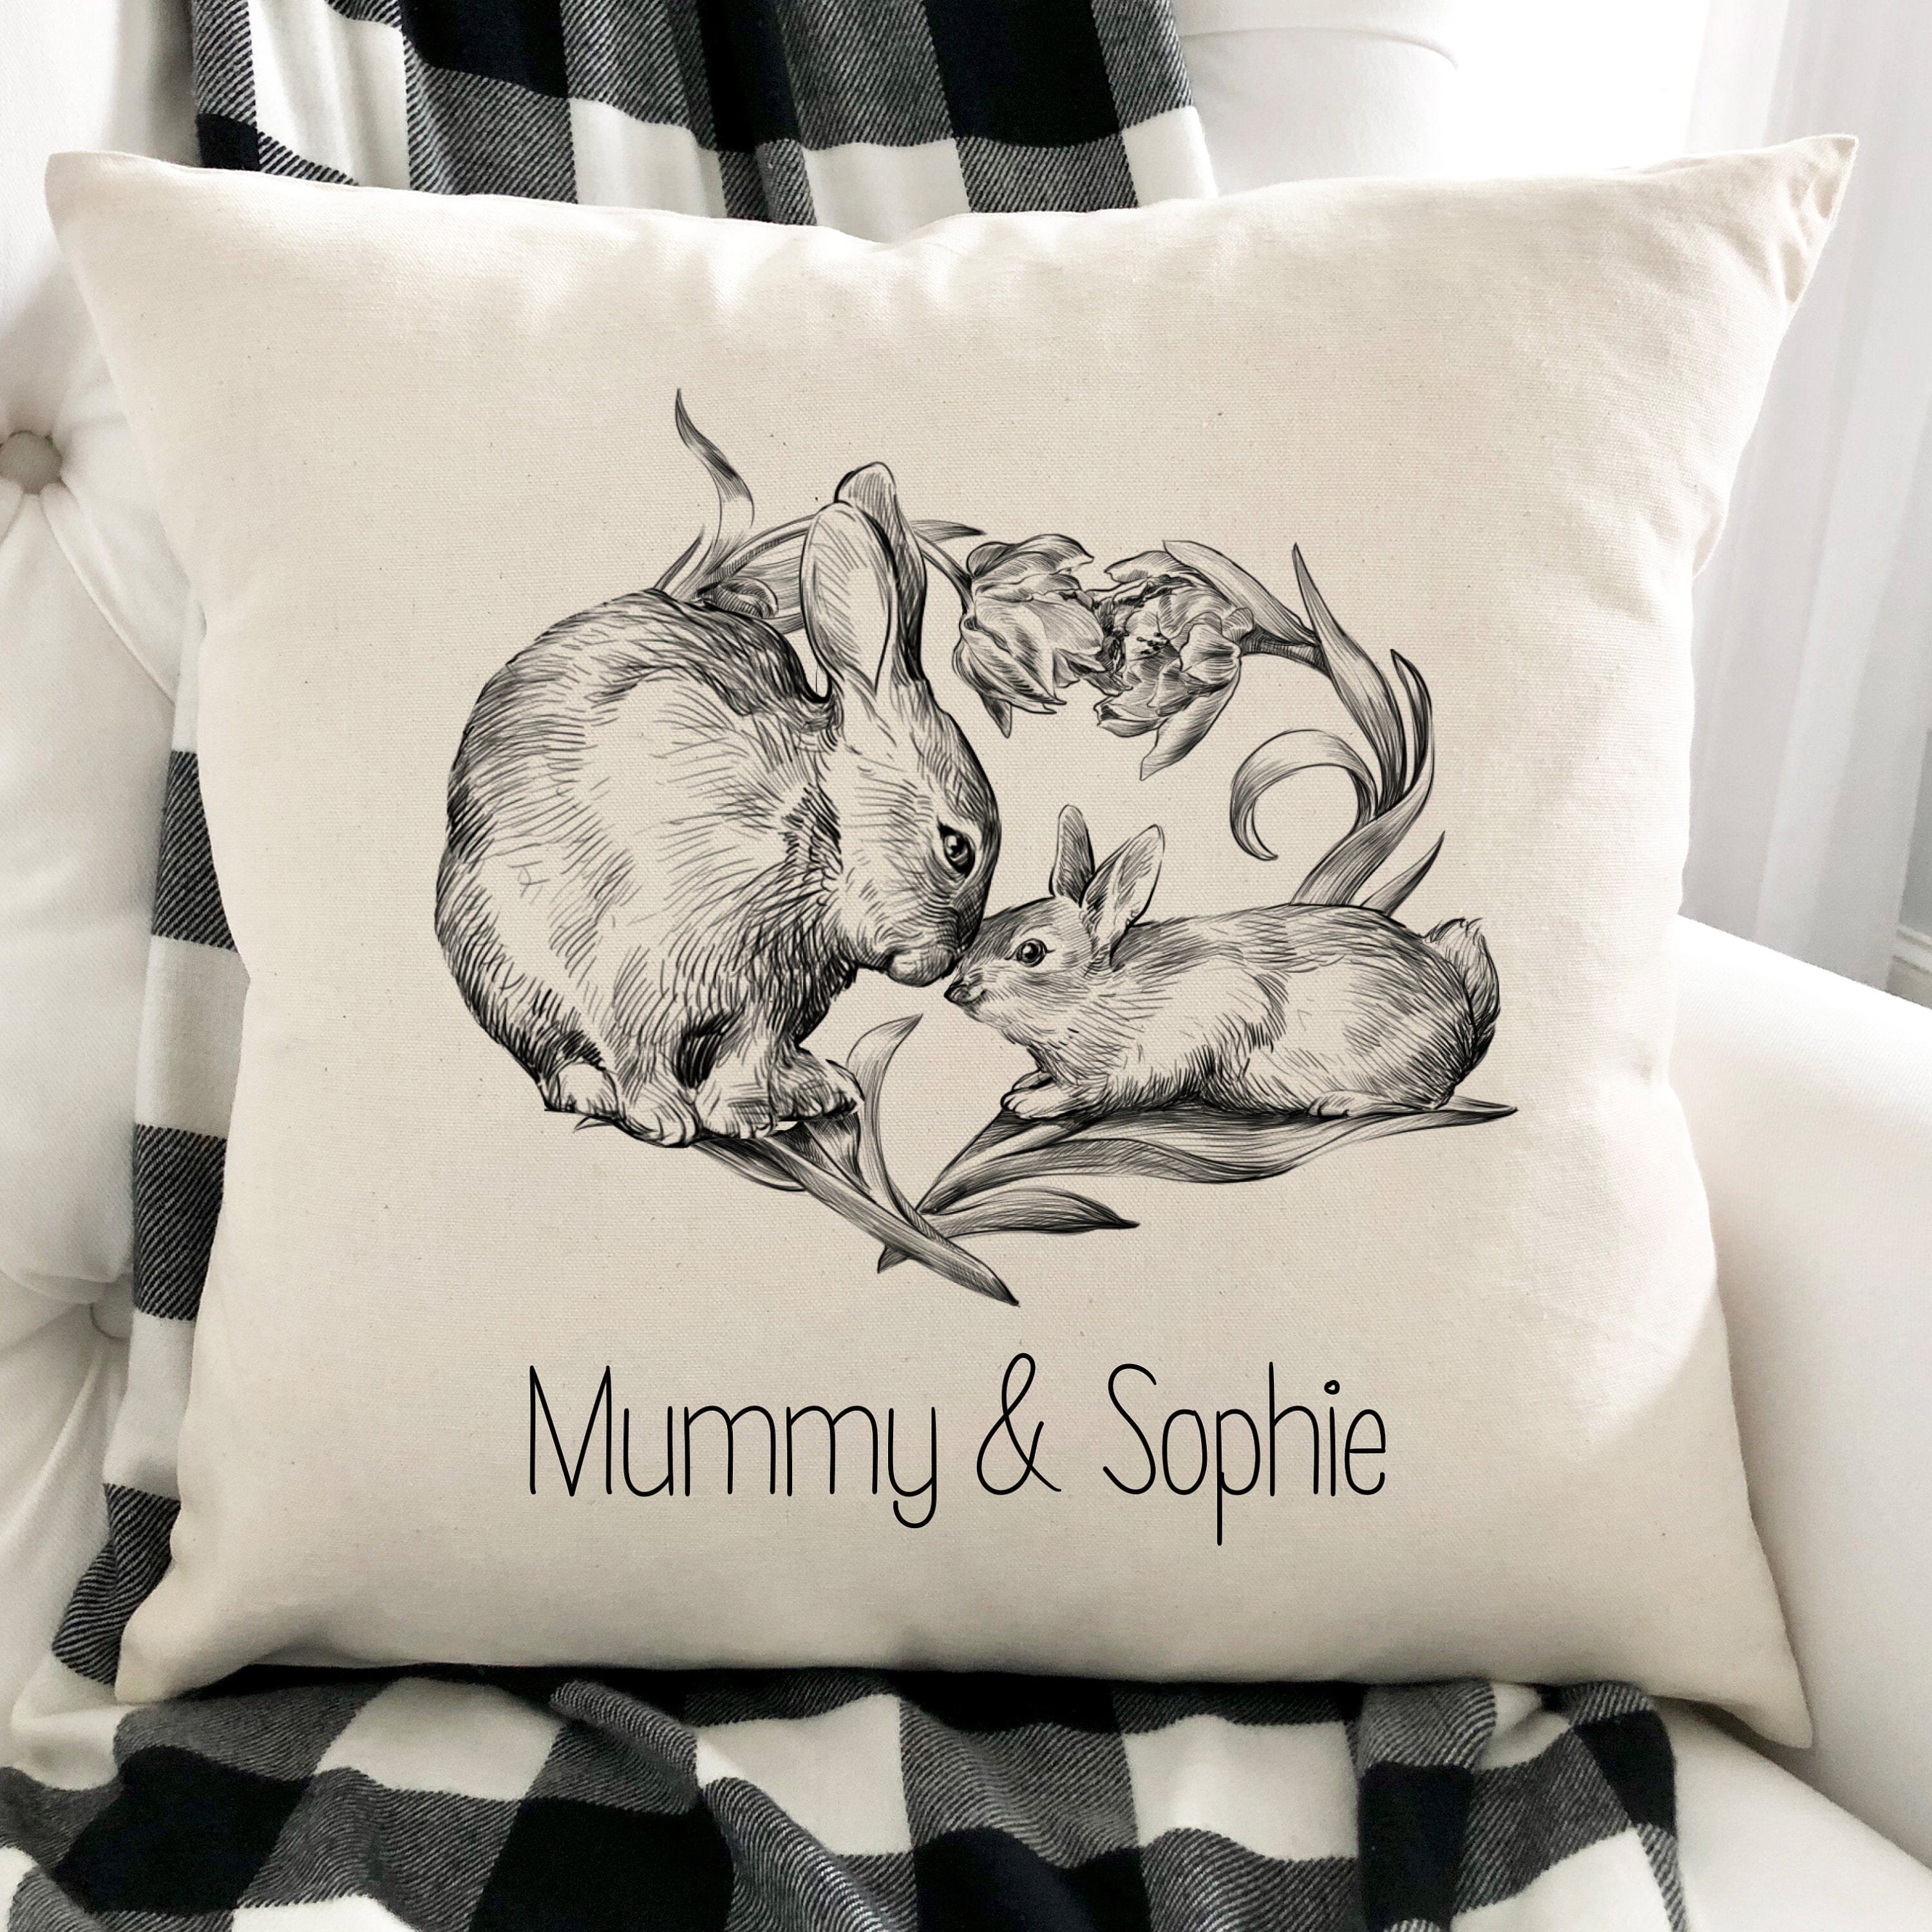 Personalised cushion for mum, Mother and daughter or son, Mother's Day Gift with child name